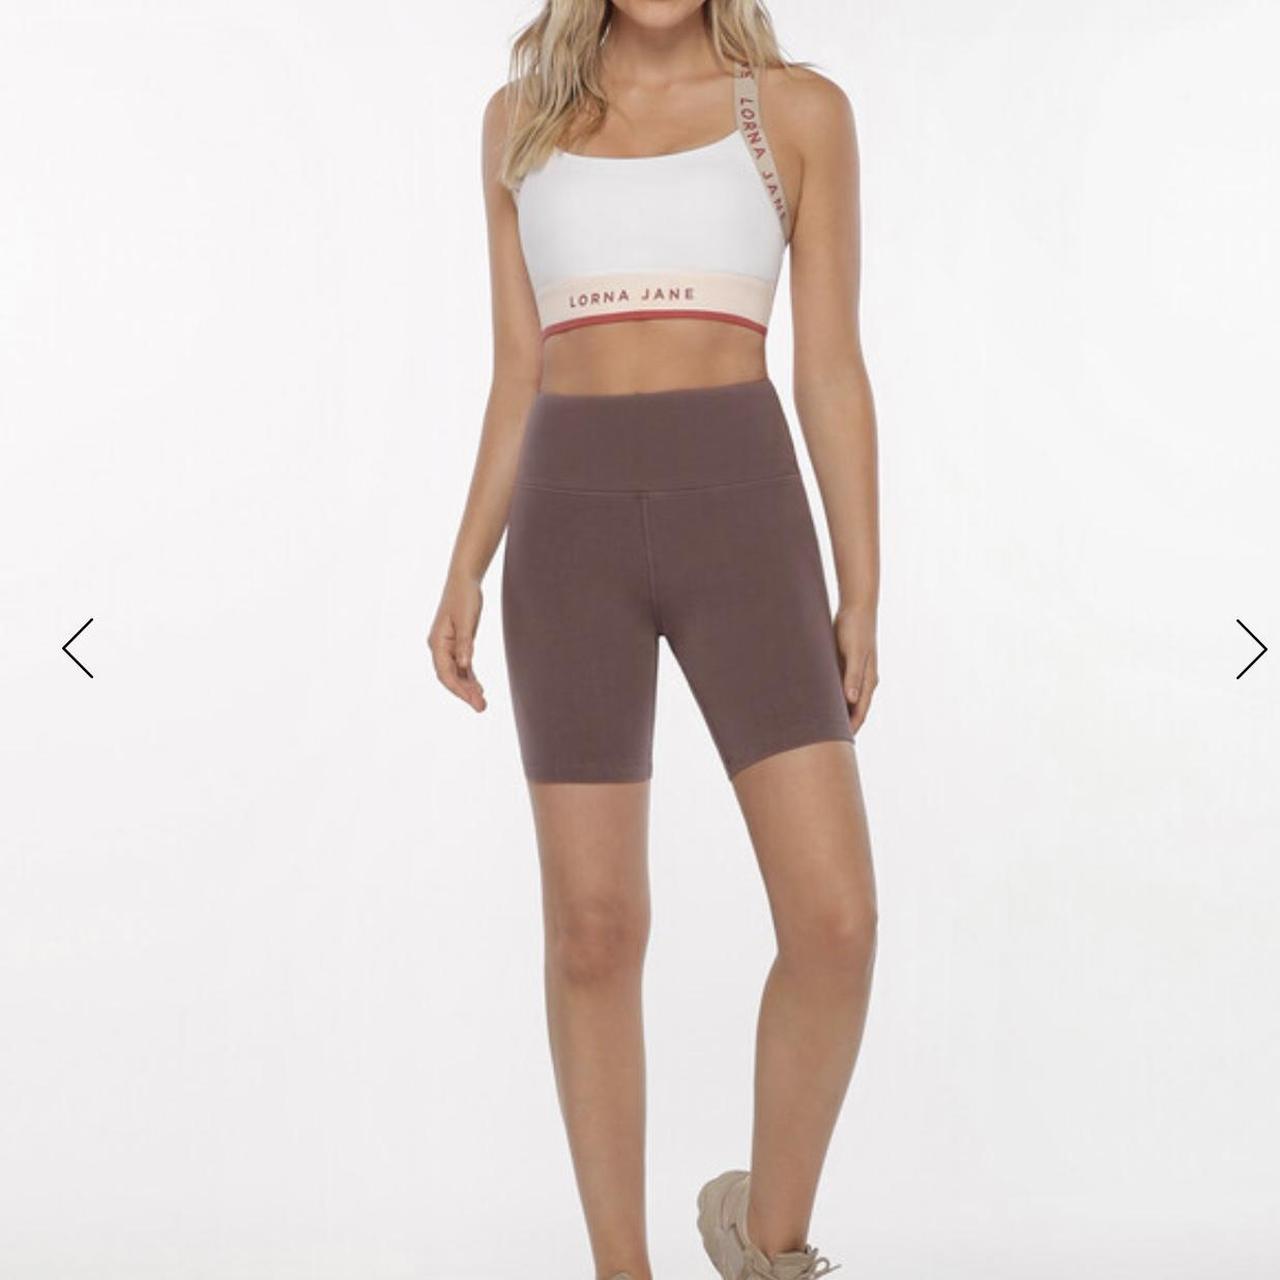 Lorna Jane relaxed bike shorts in Stone , Size XS, But